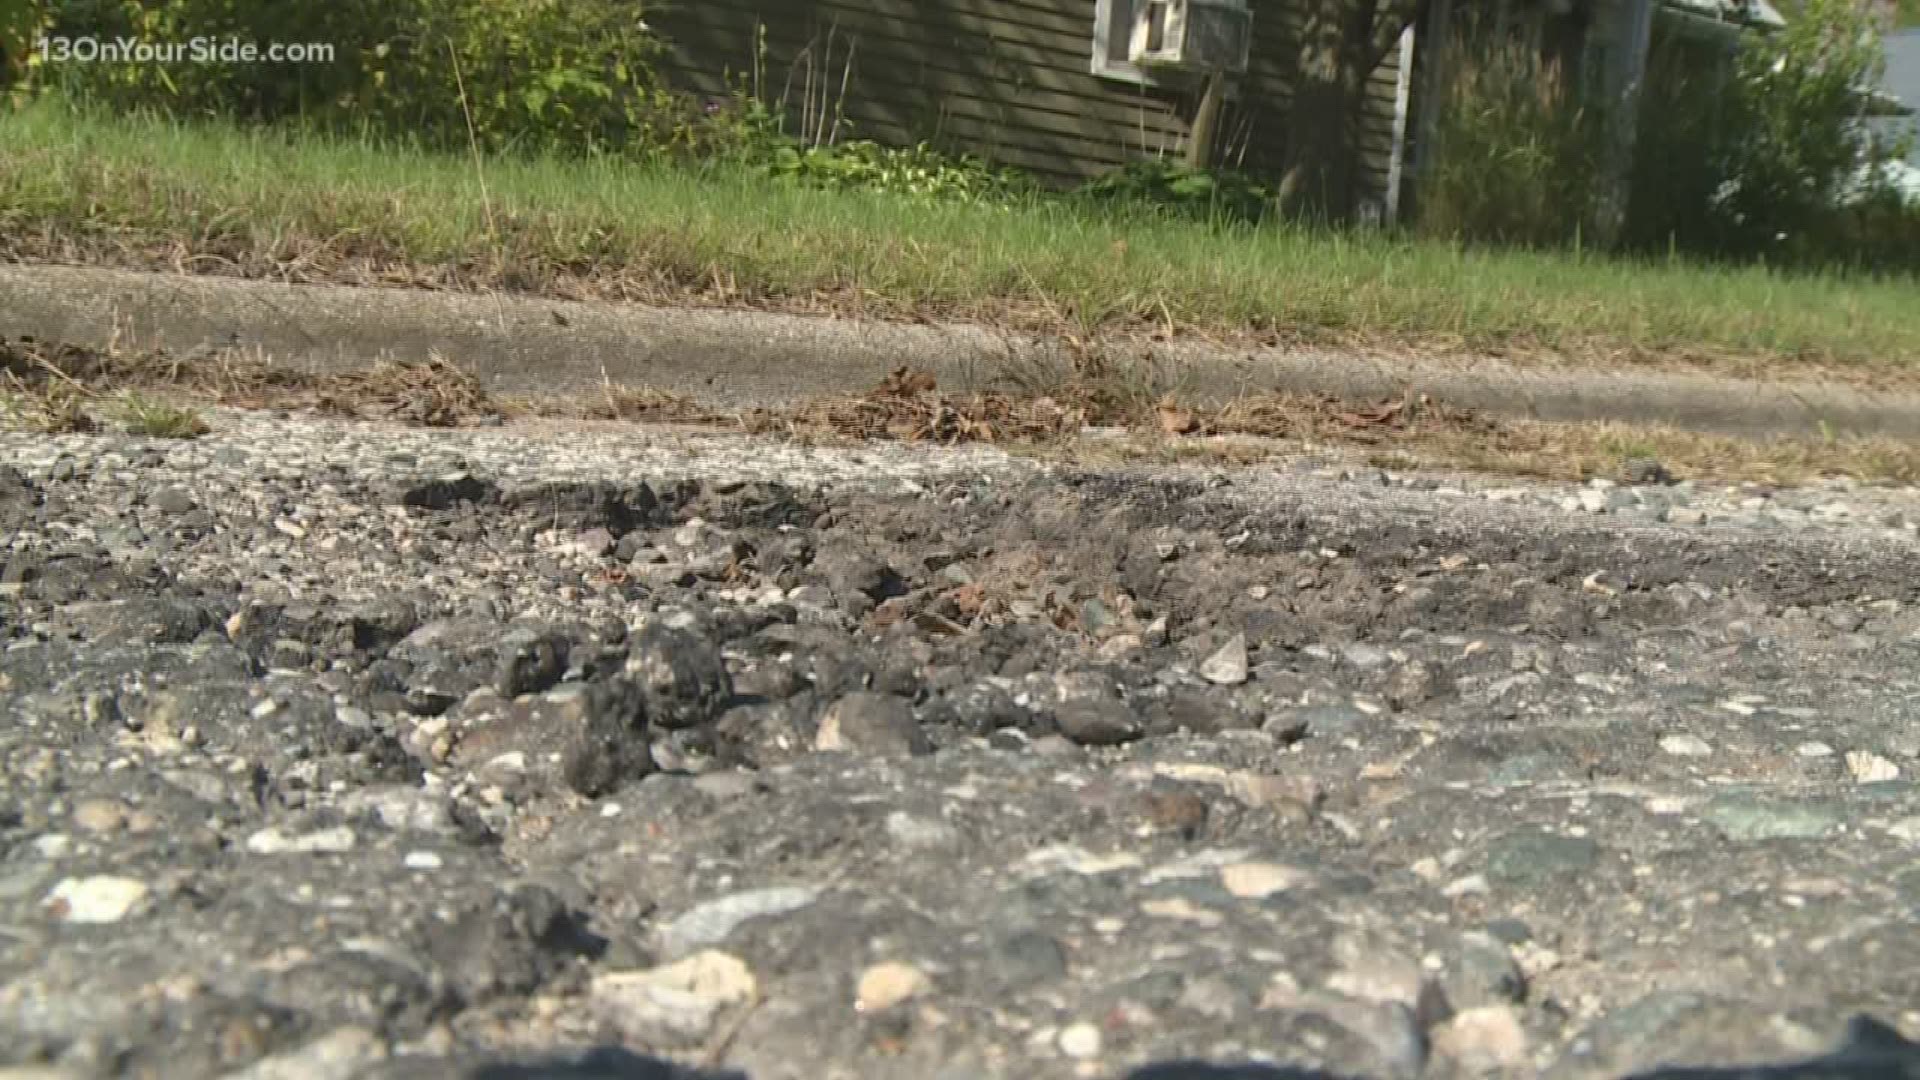 The City of Lowell is asking residents to consider a ballot proposal that would allow the city to collect income tax in order to repair roads and streets.